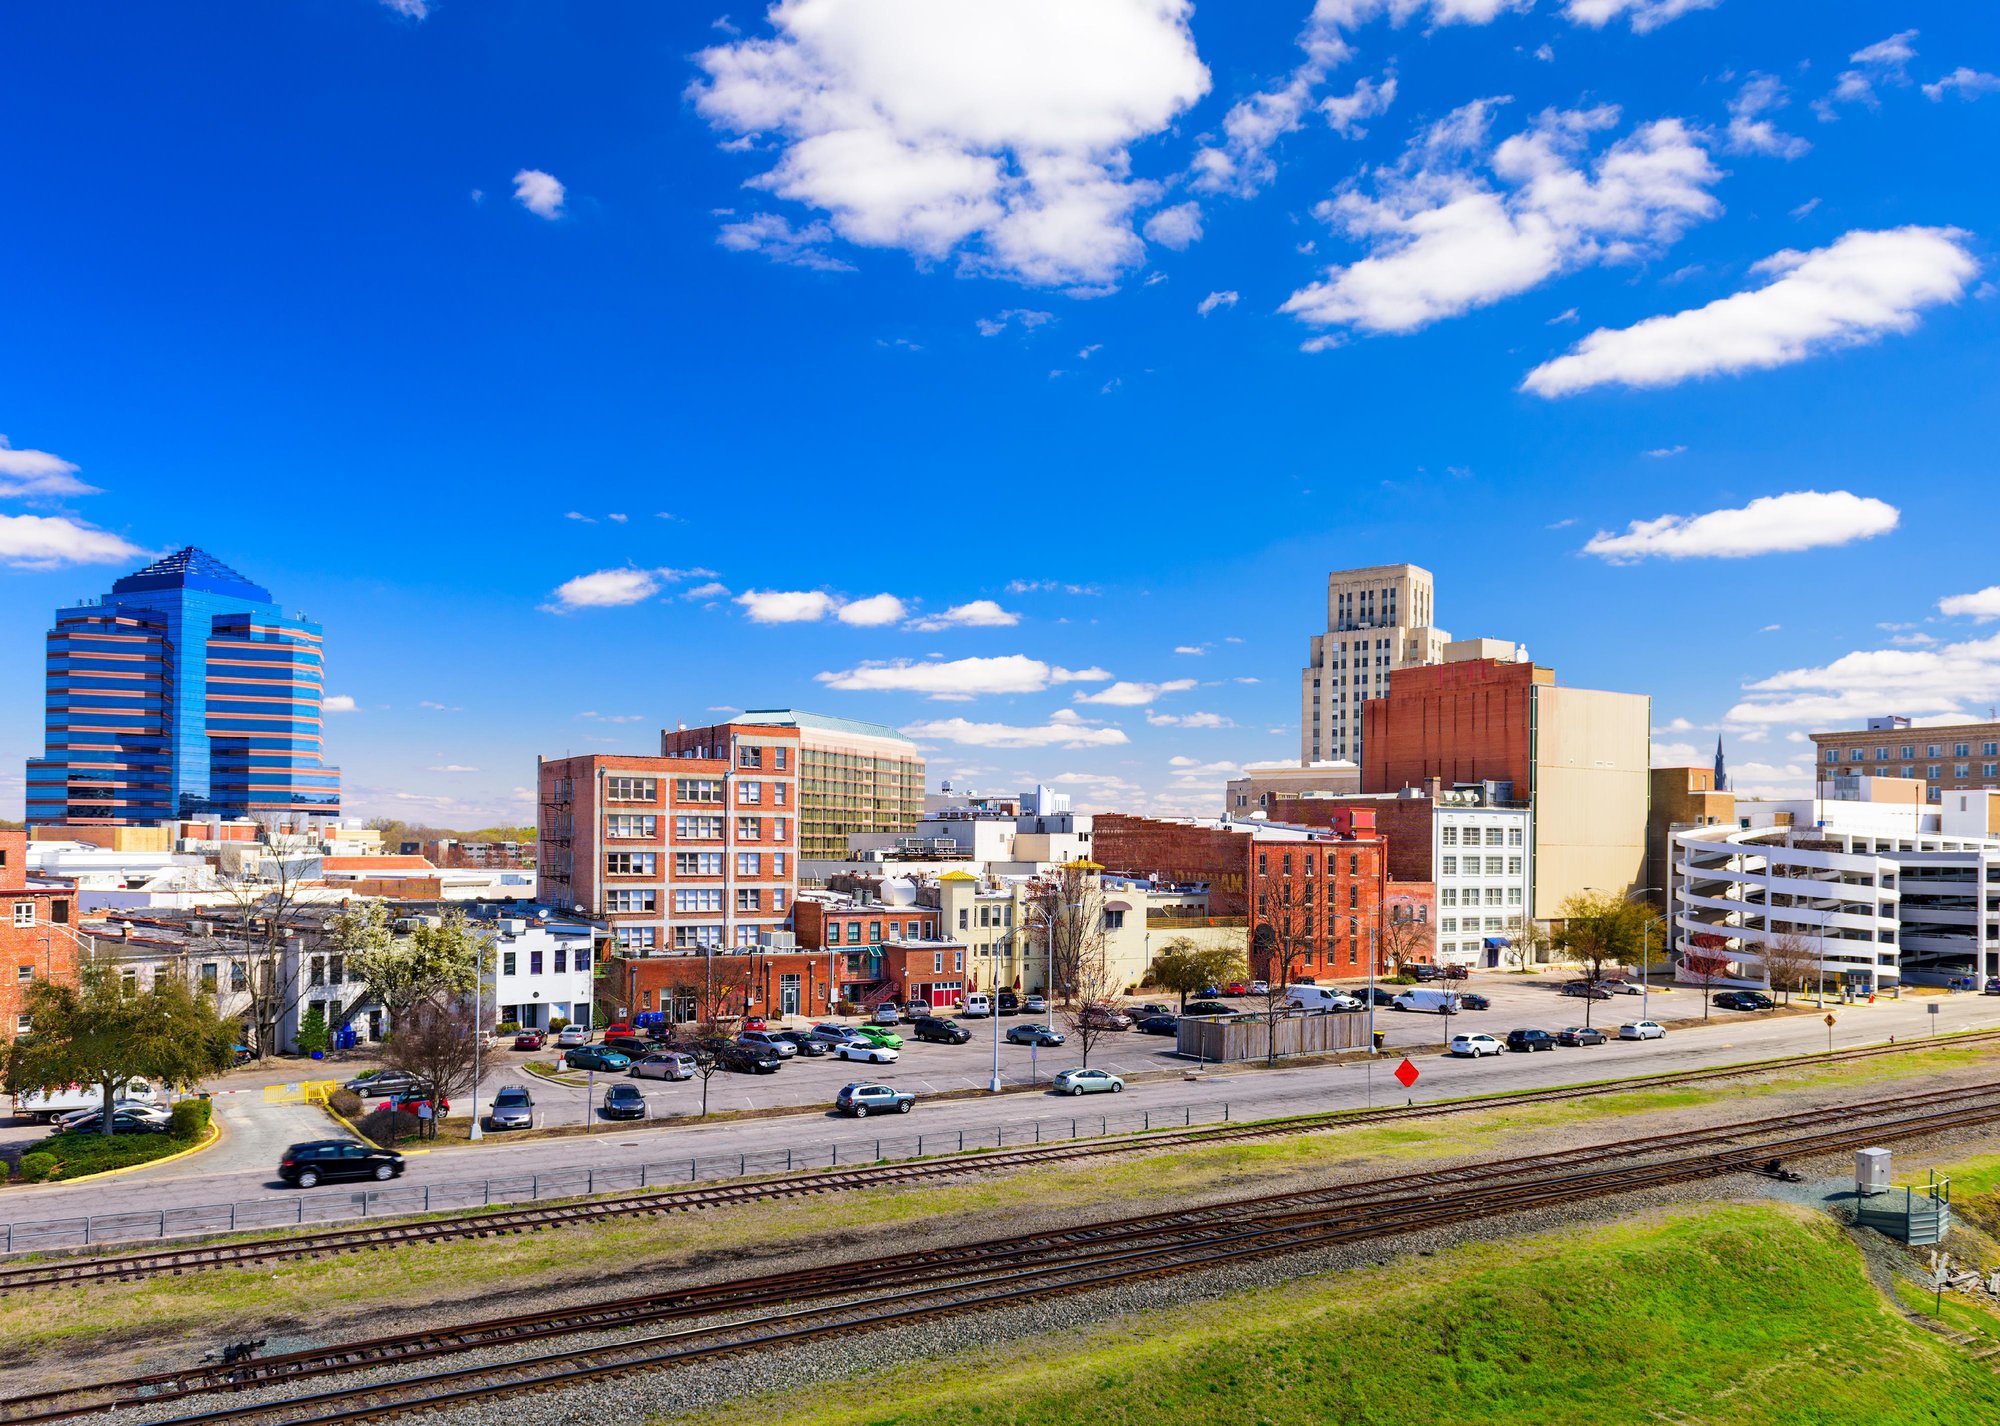 “Downtown Durham, South Carolina with railroad tracks in foreground” - Source: Sean Pavone // Shutterstock